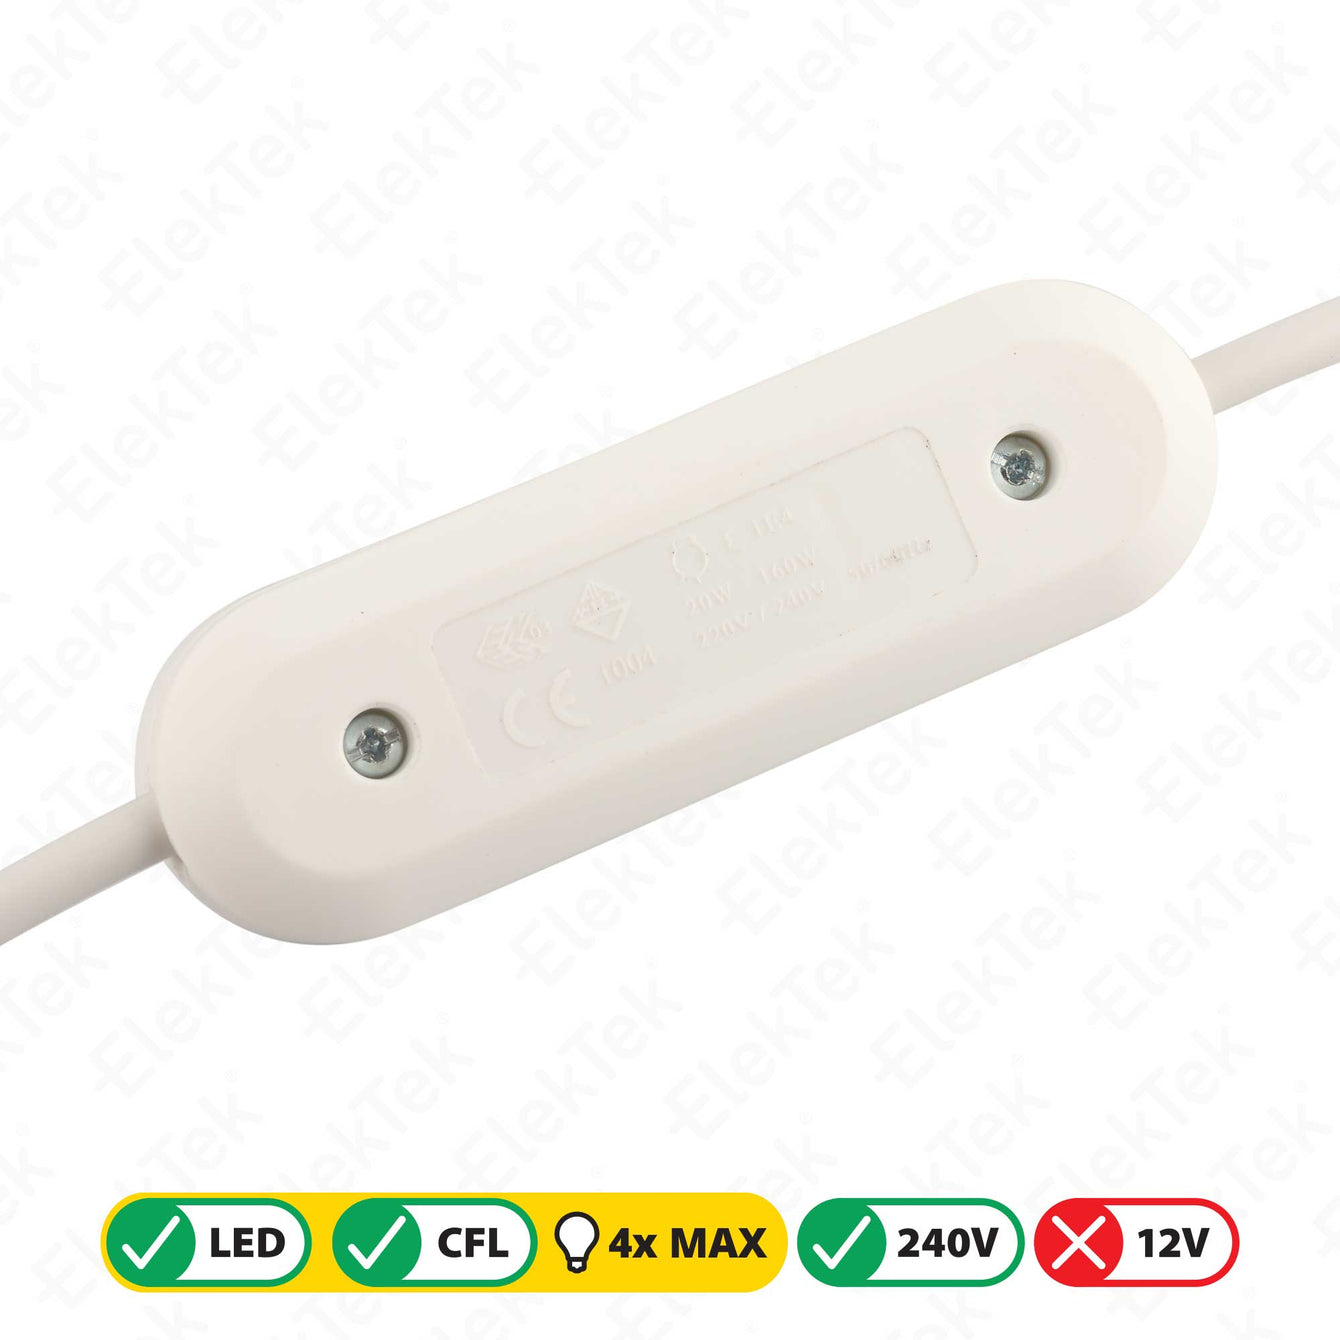 ElekTek LED Compatible Universal In Line Push Button Dimmer Switch 240v AC 2 Core Suitable For LED CFL & Incandescent Bulbs White 